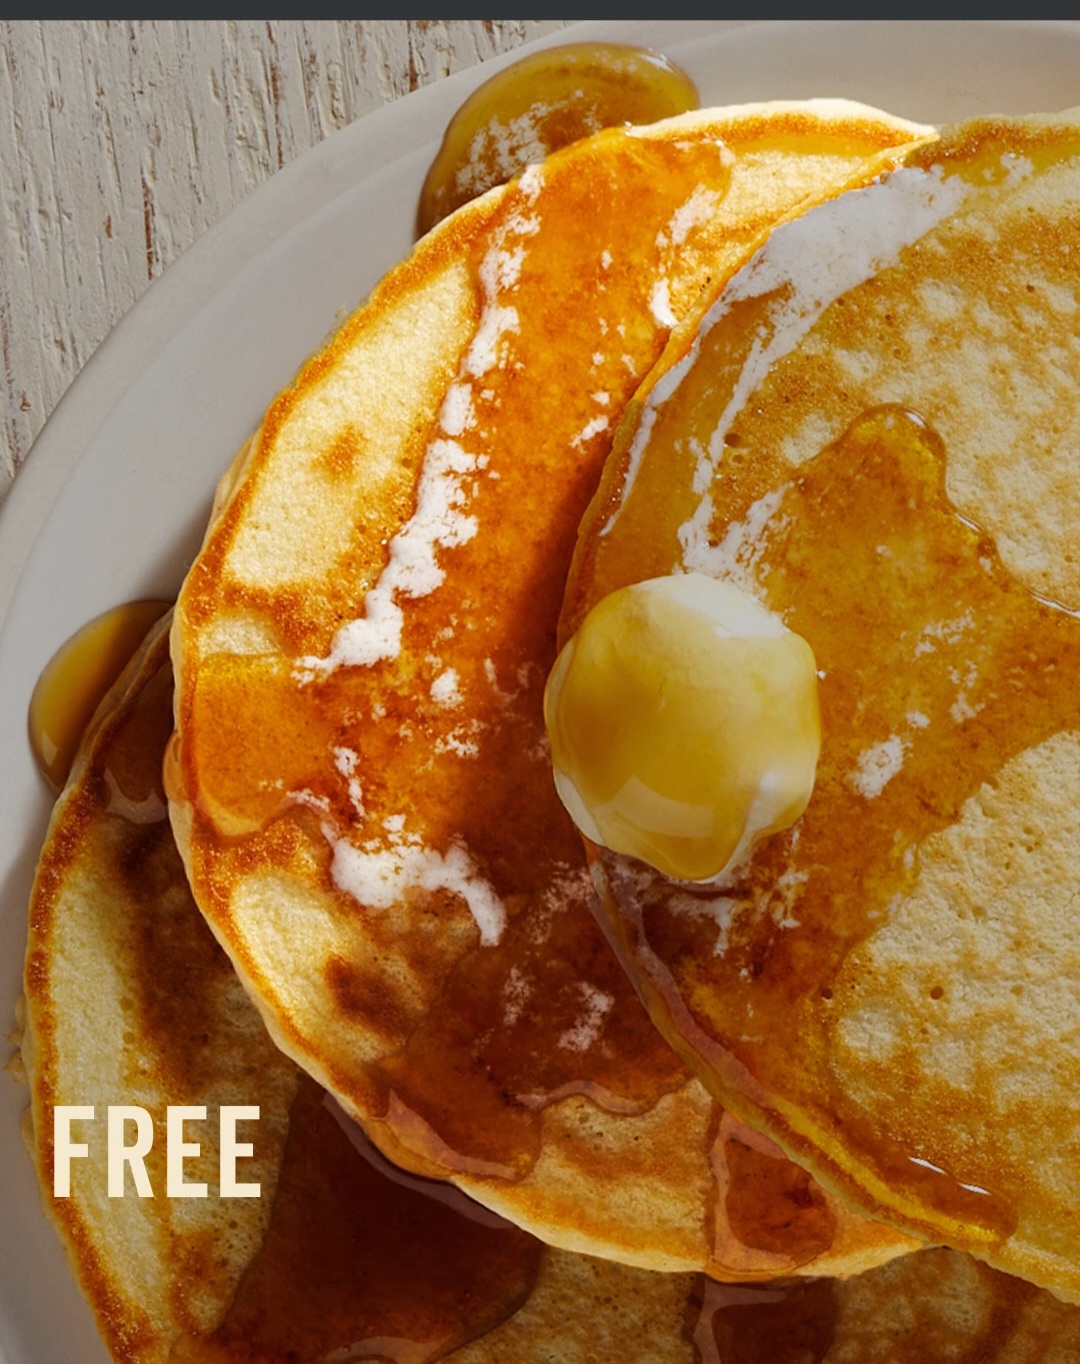 FREE Side Of Pancakes With Any Entree Or Kids Meal Purchase At Cracker ...